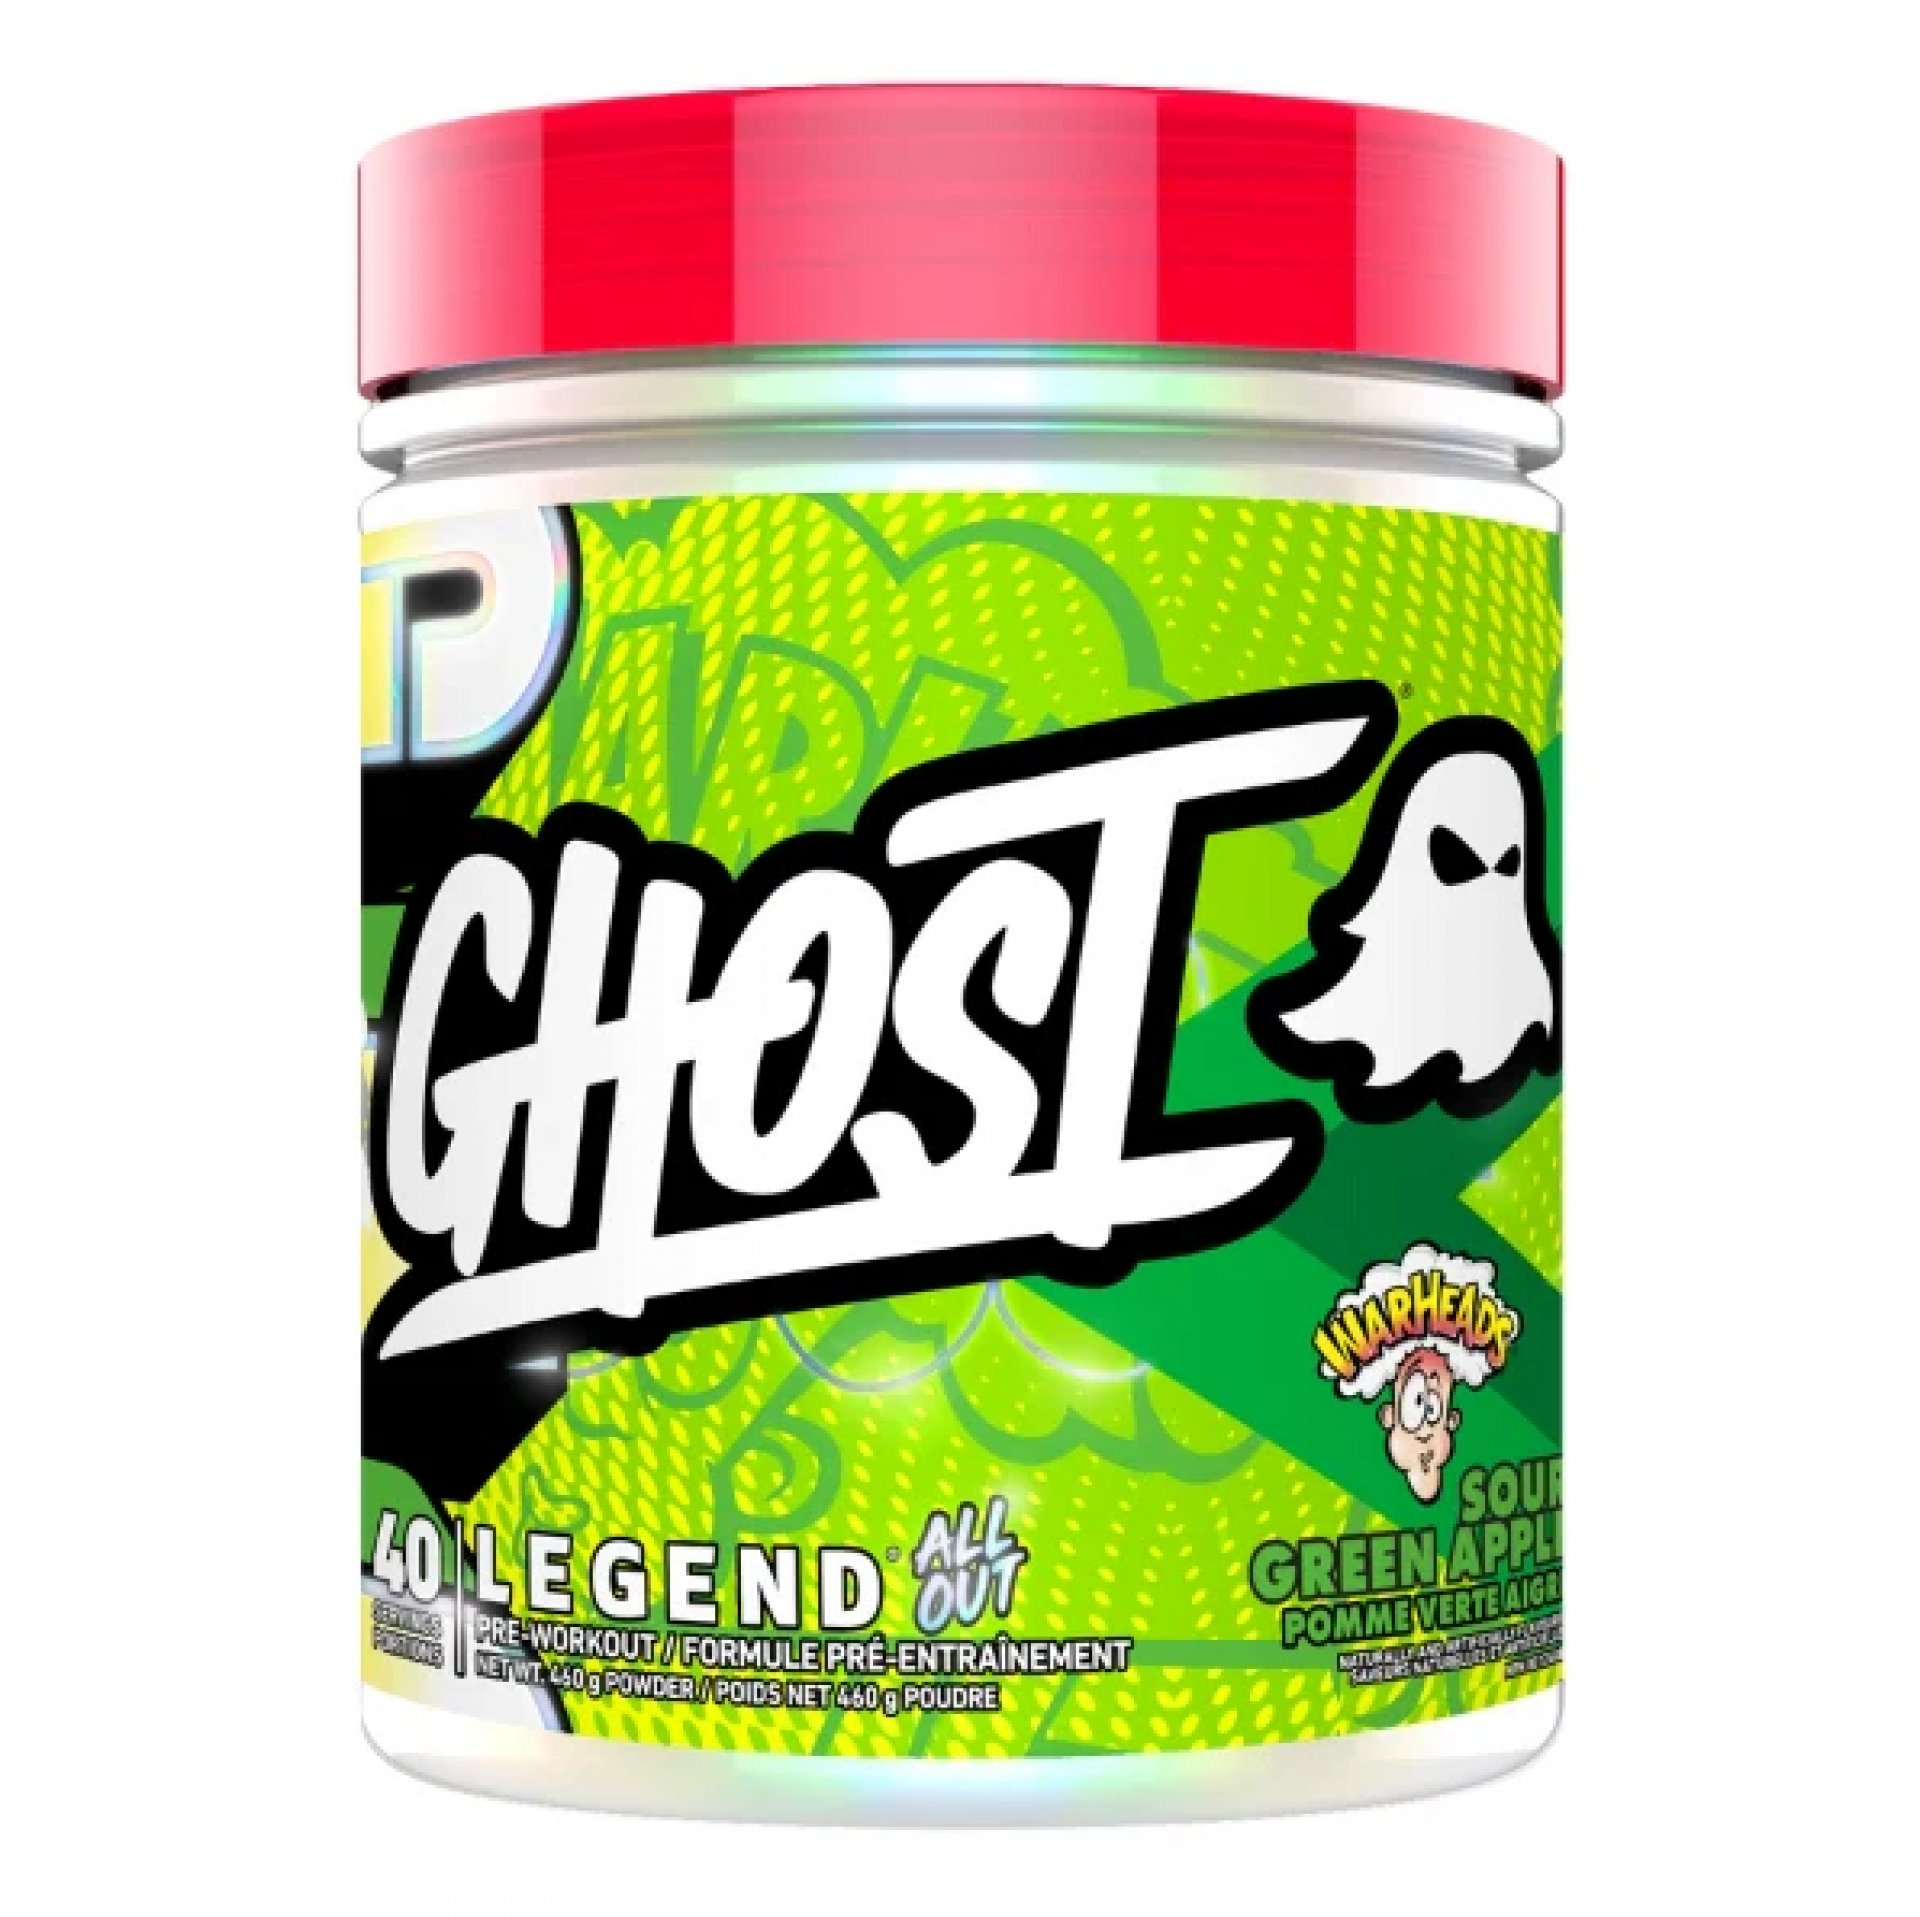 Ghost Legend All Out - $54.99